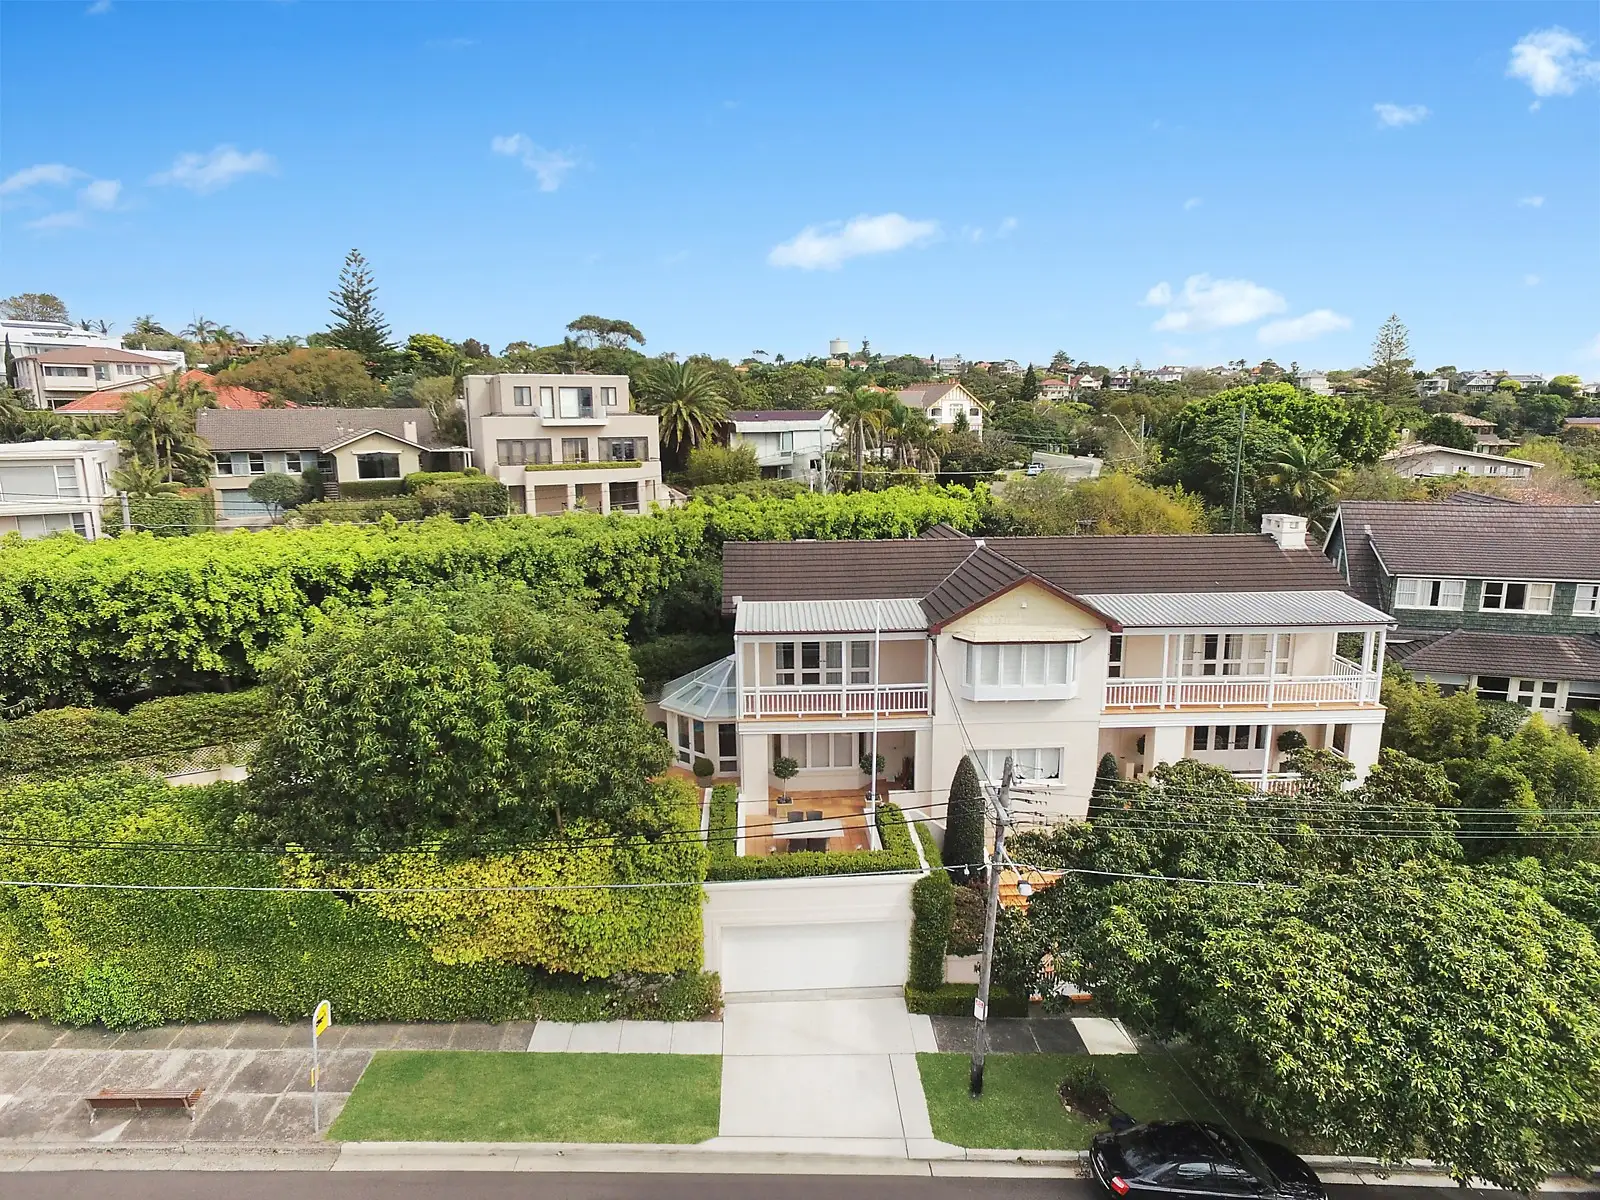 Photo #1: 2 Fitzwilliam Road, Vaucluse - Sold by Sydney Sotheby's International Realty